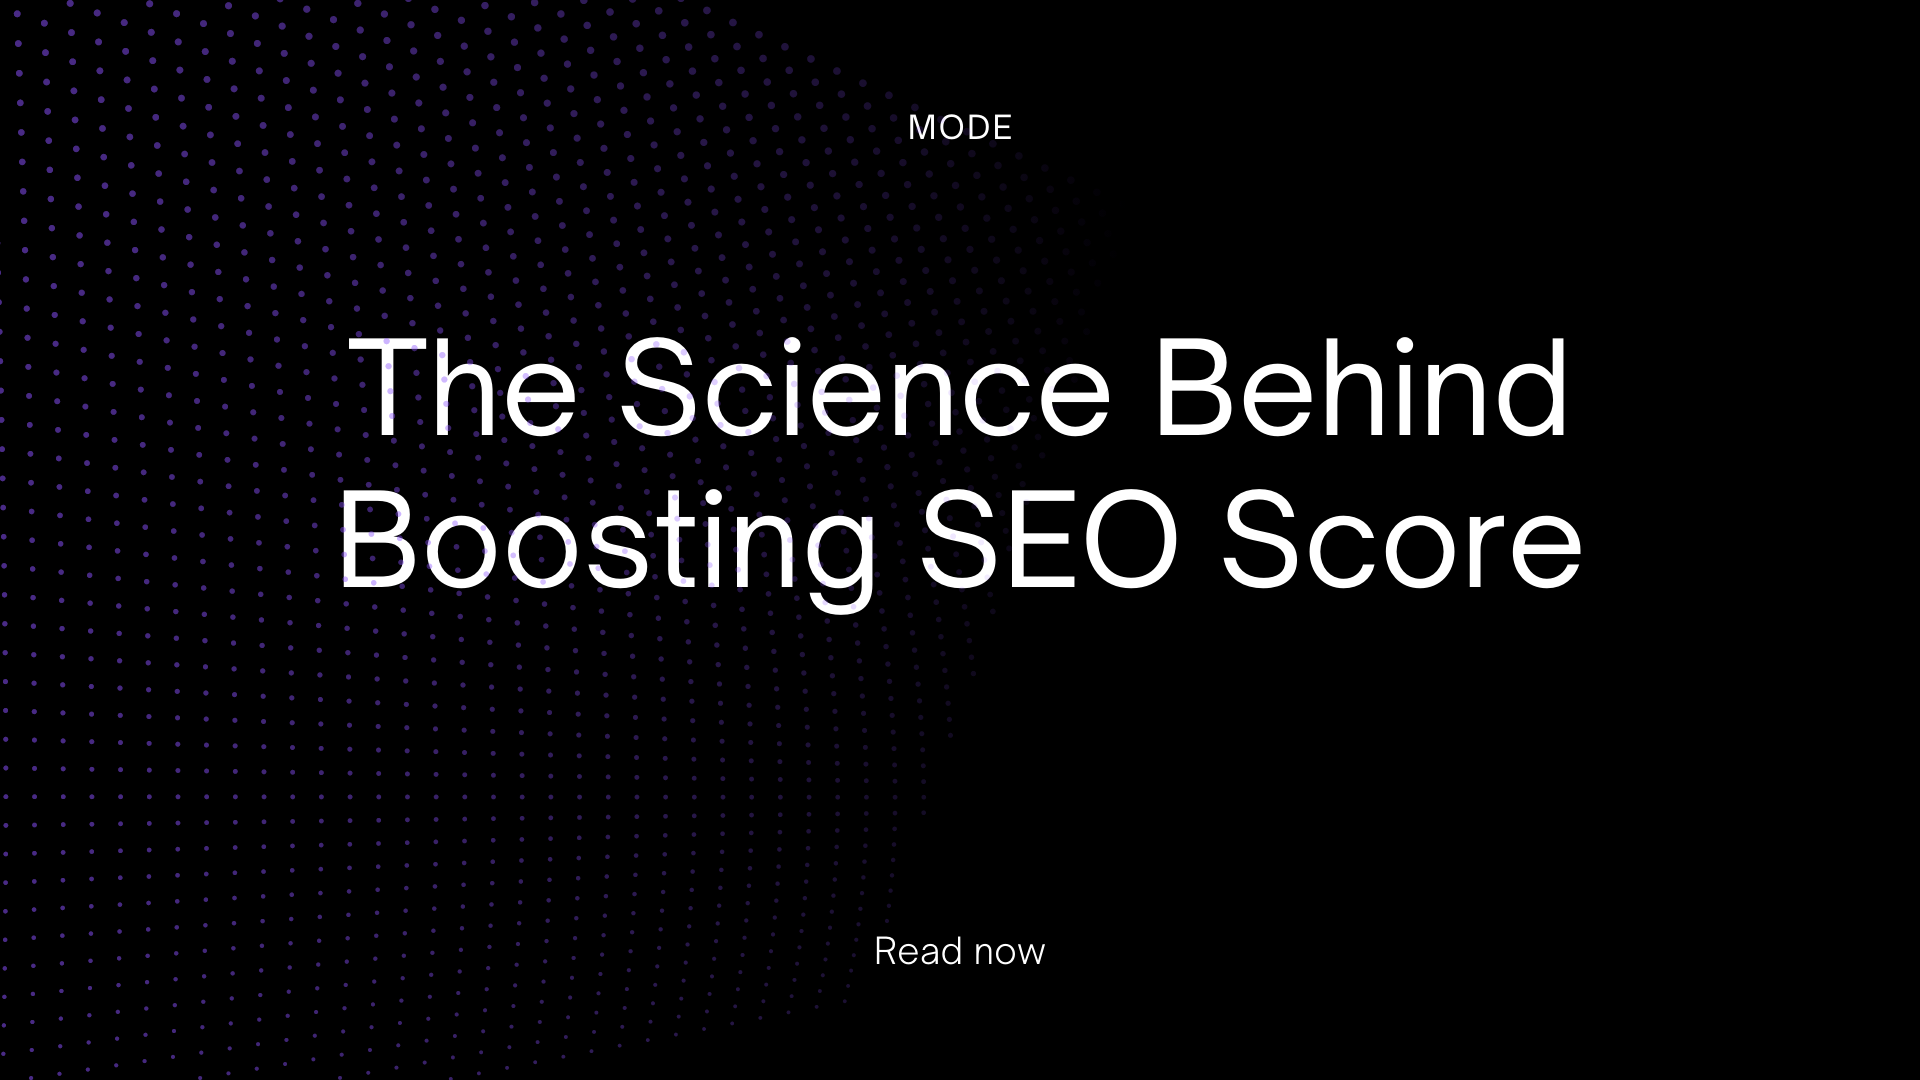 The Science Behind Boosting SEO Score